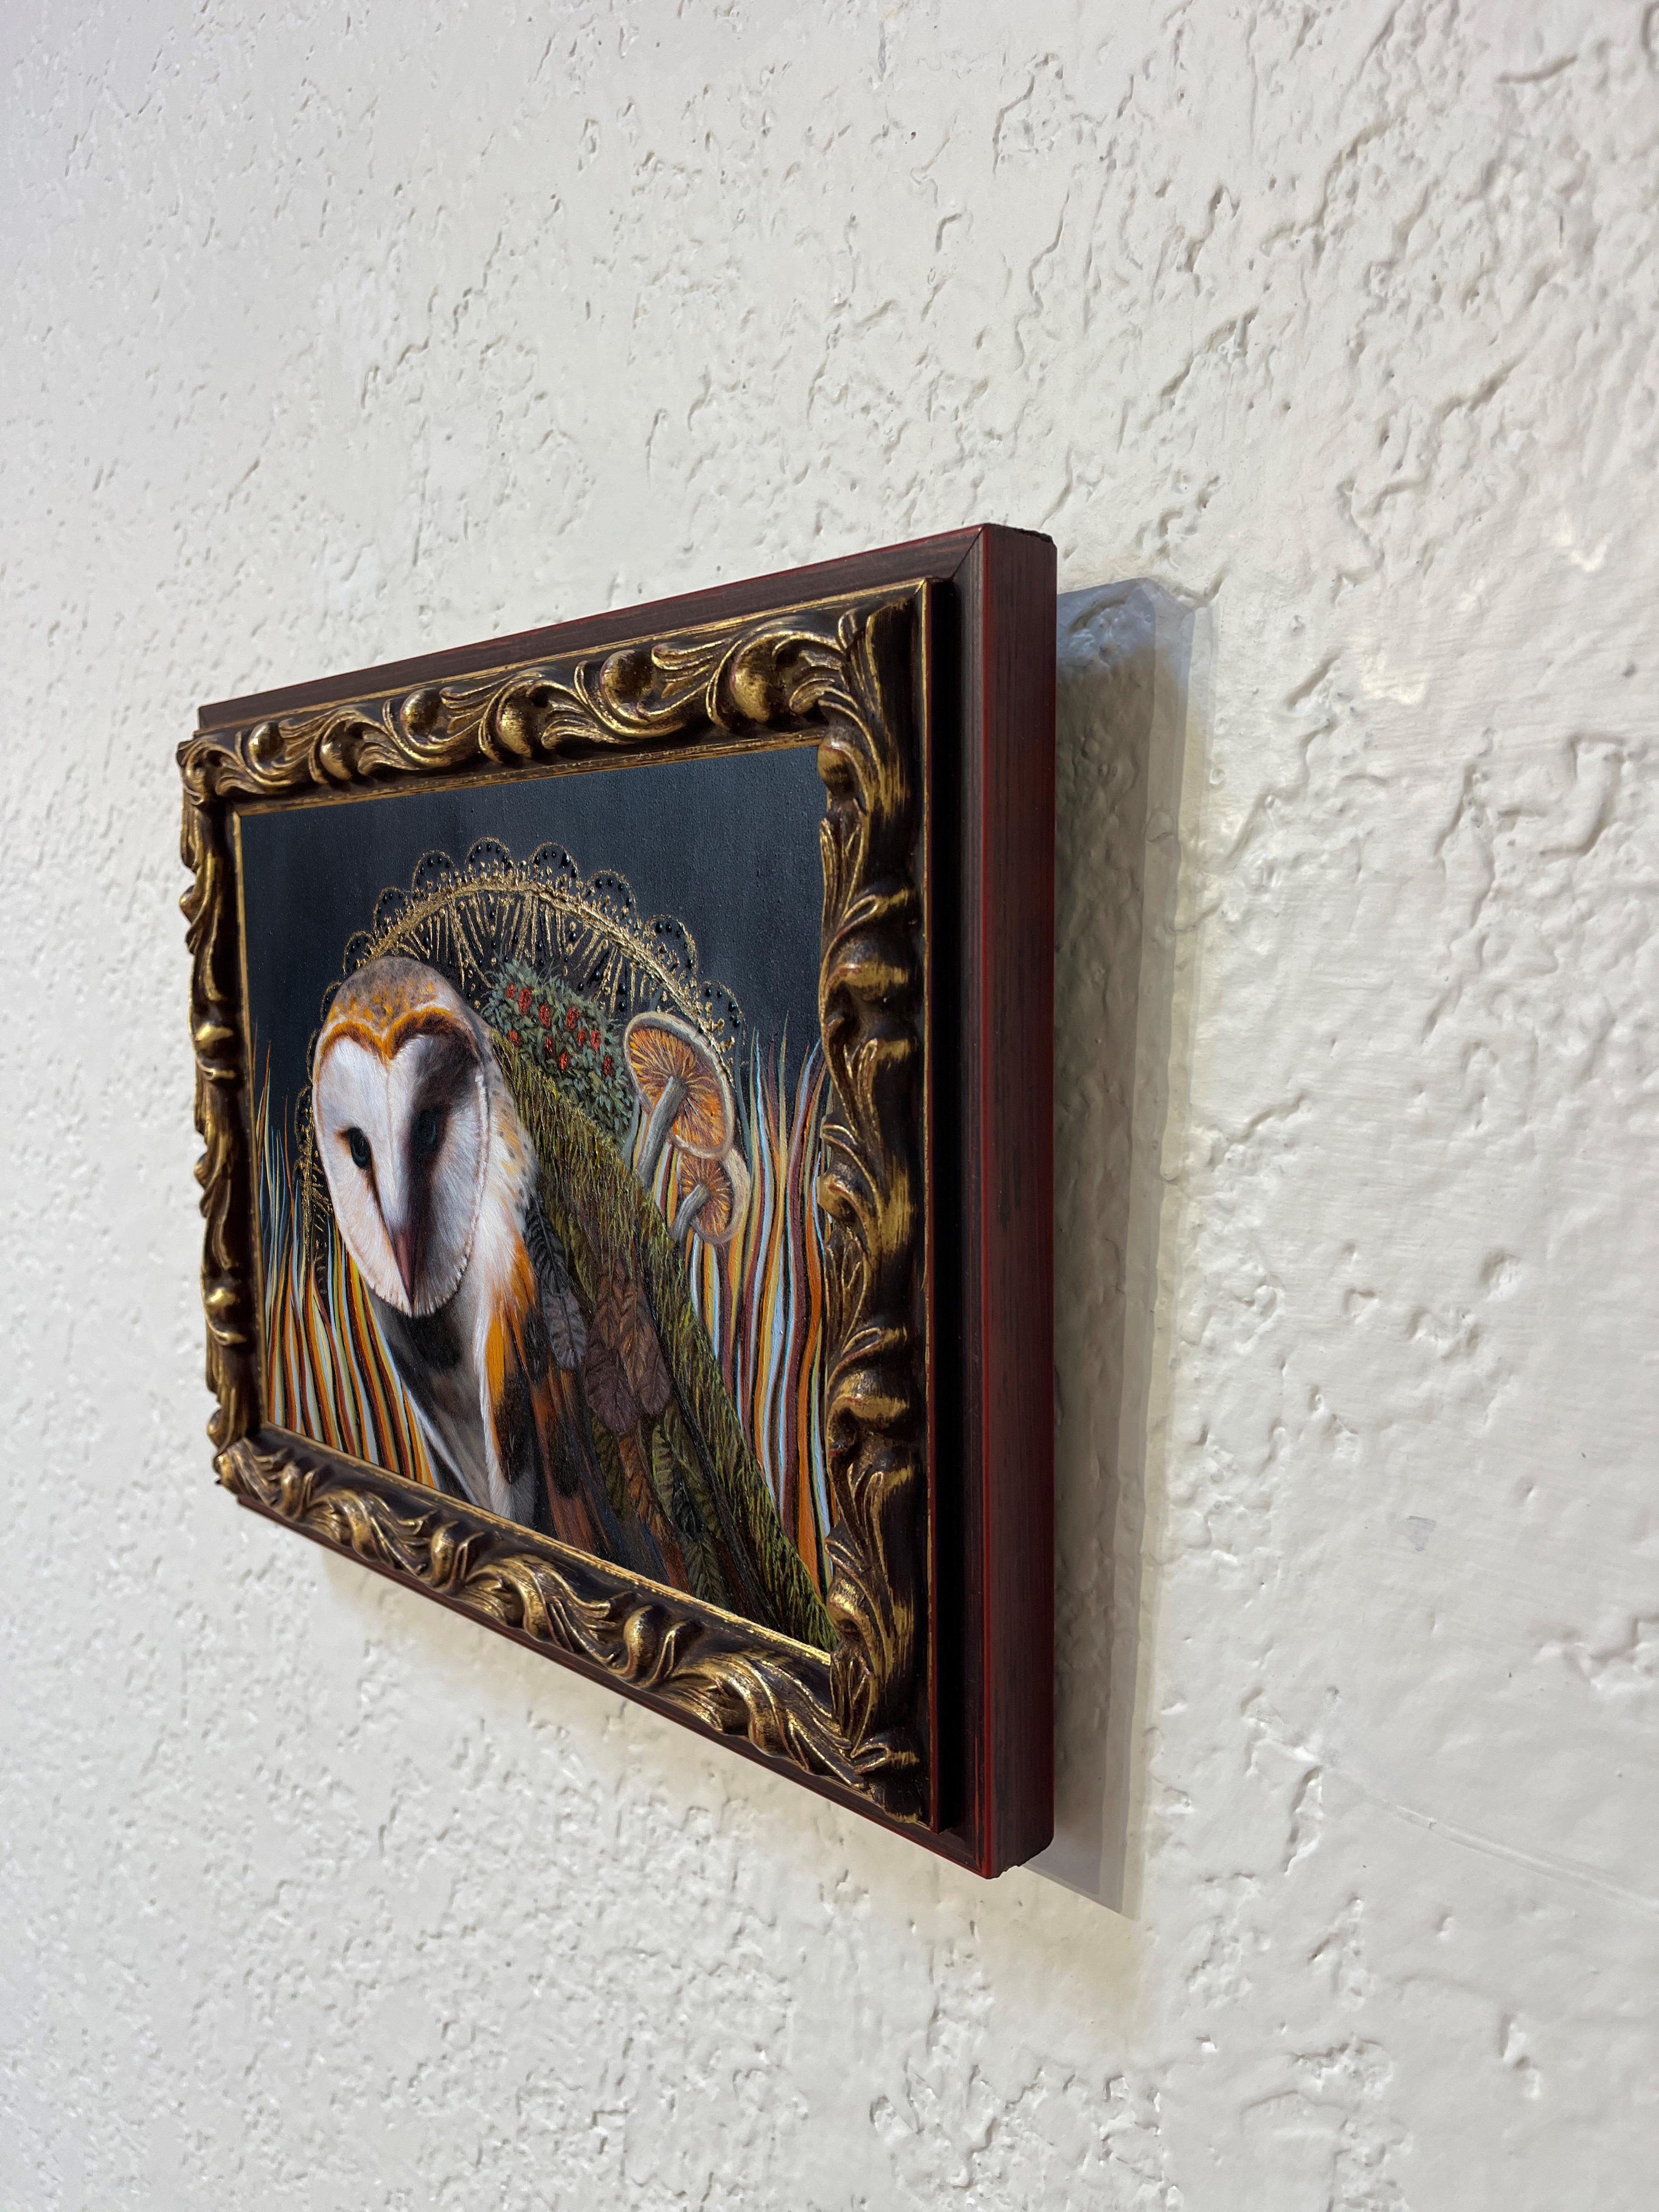 Andrada Trapnell's 'Dream Catcher' Original Owl Oil Painting with Ornate Frame For Sale 8